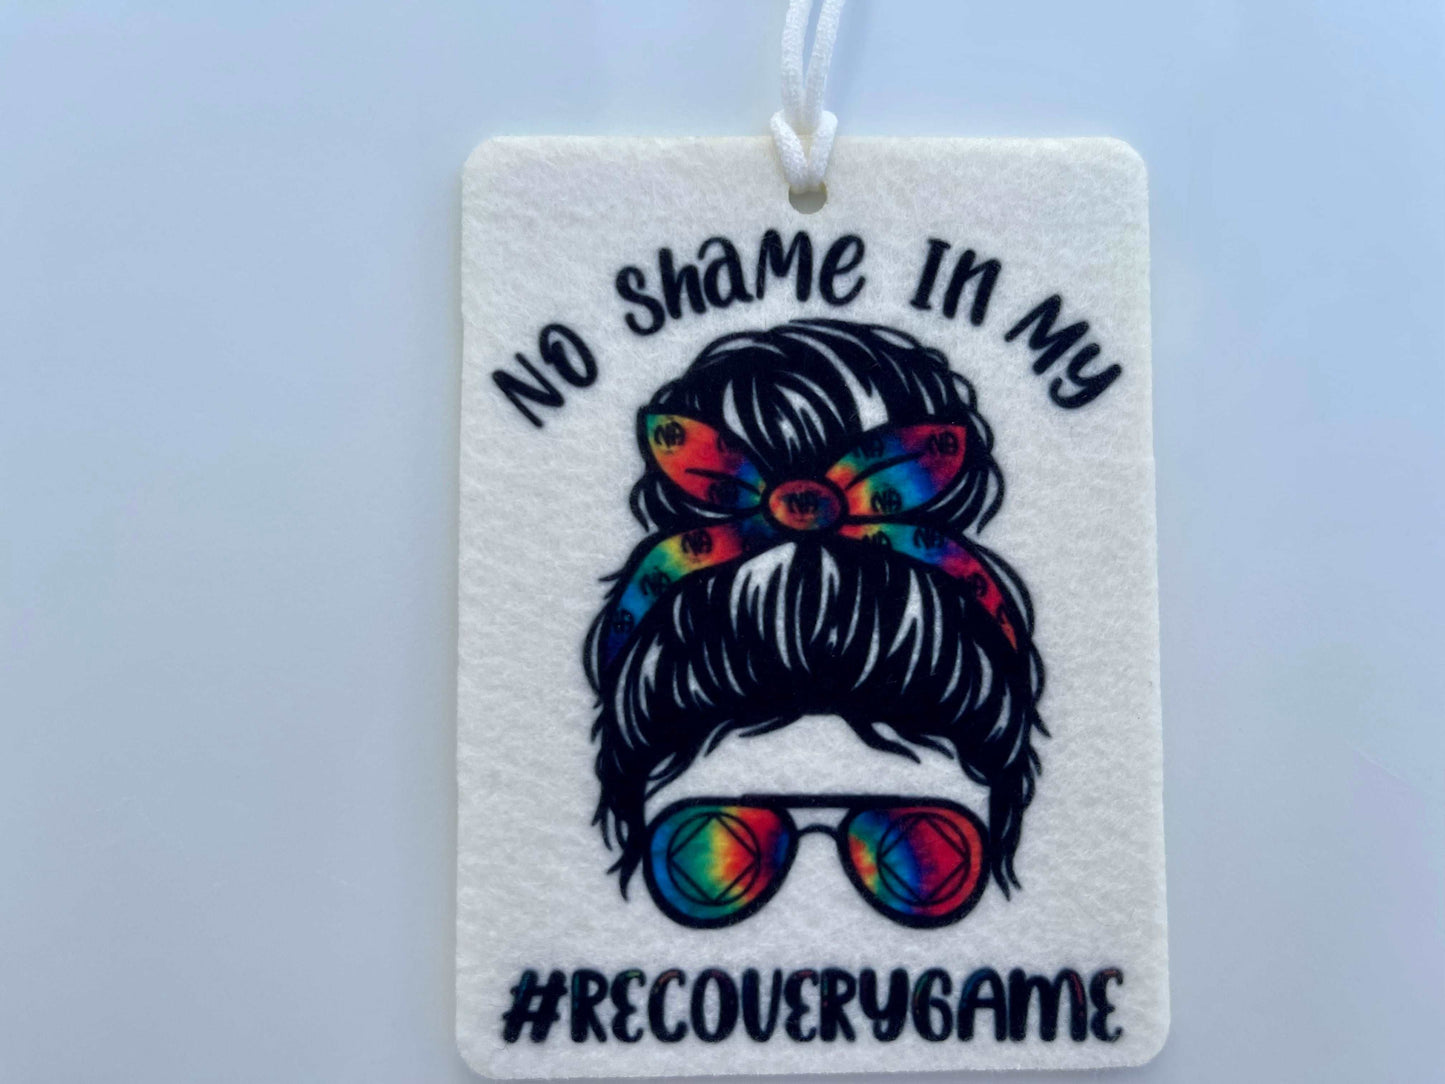 No shame in my recovery game air freshener